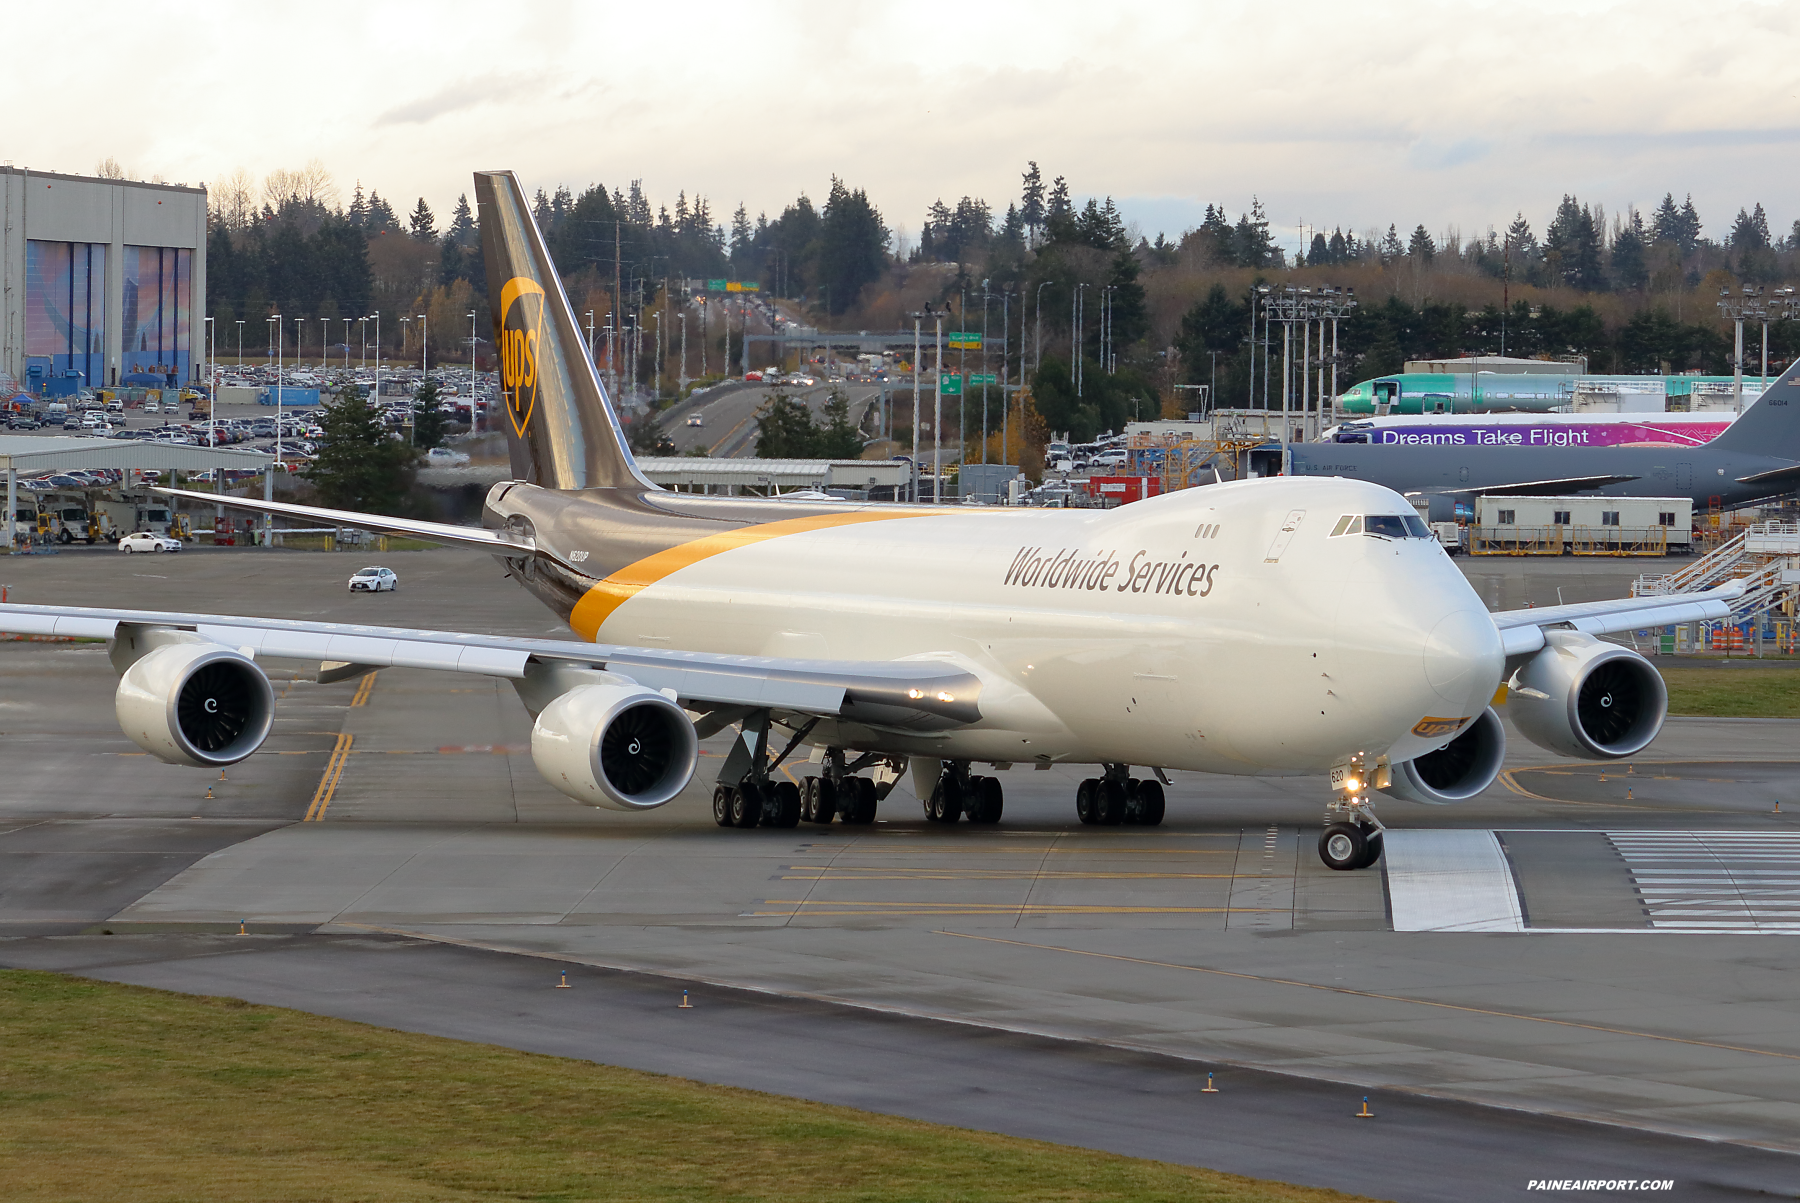 UPS 747-8F N620UP at Paine Field